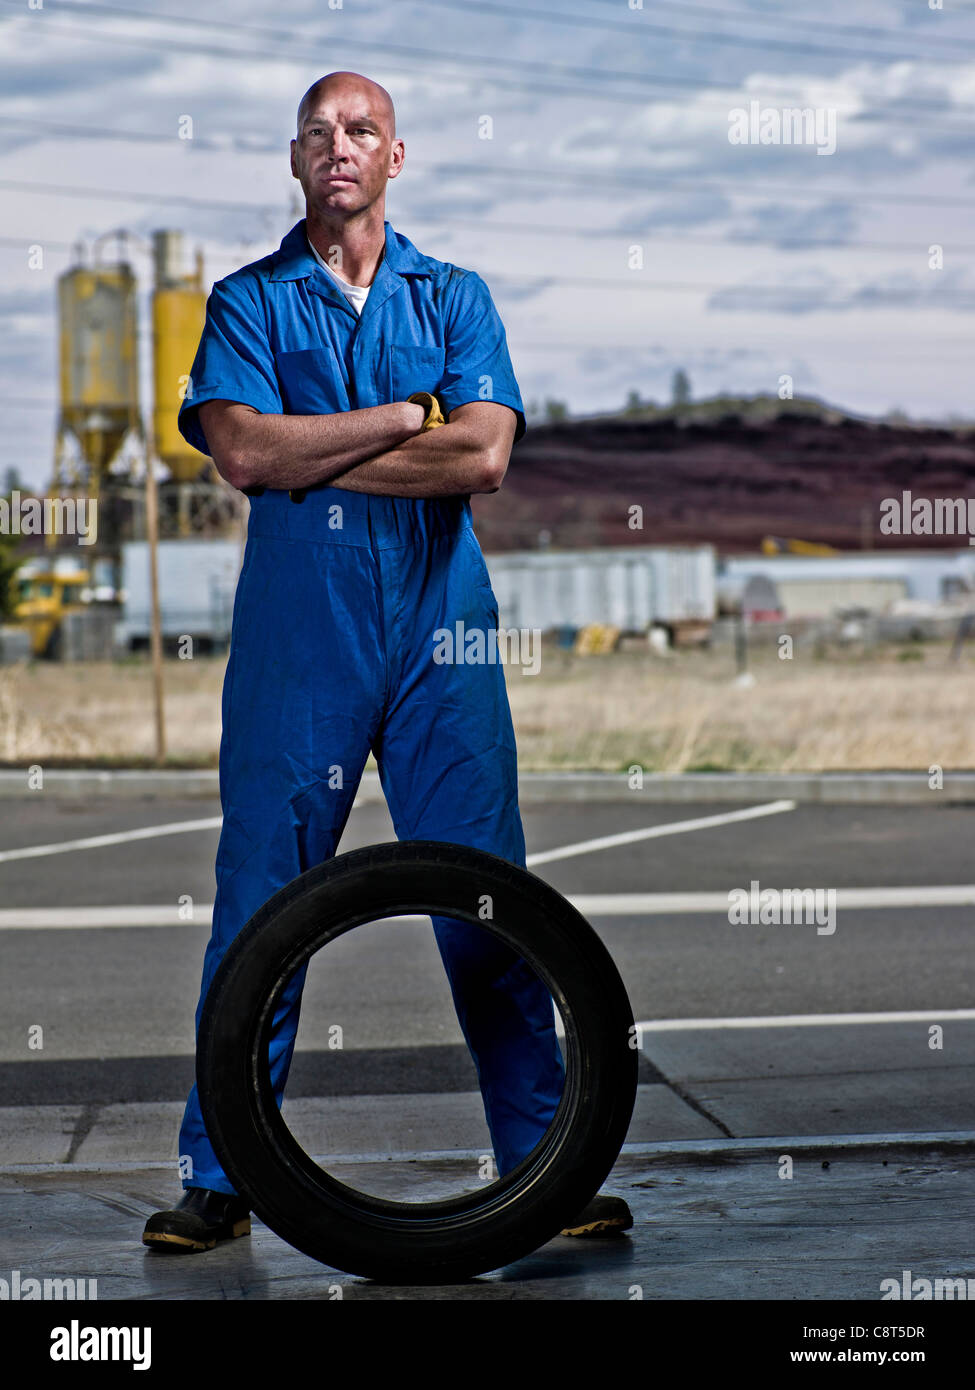 Serious mechanic standing with tire Stock Photo